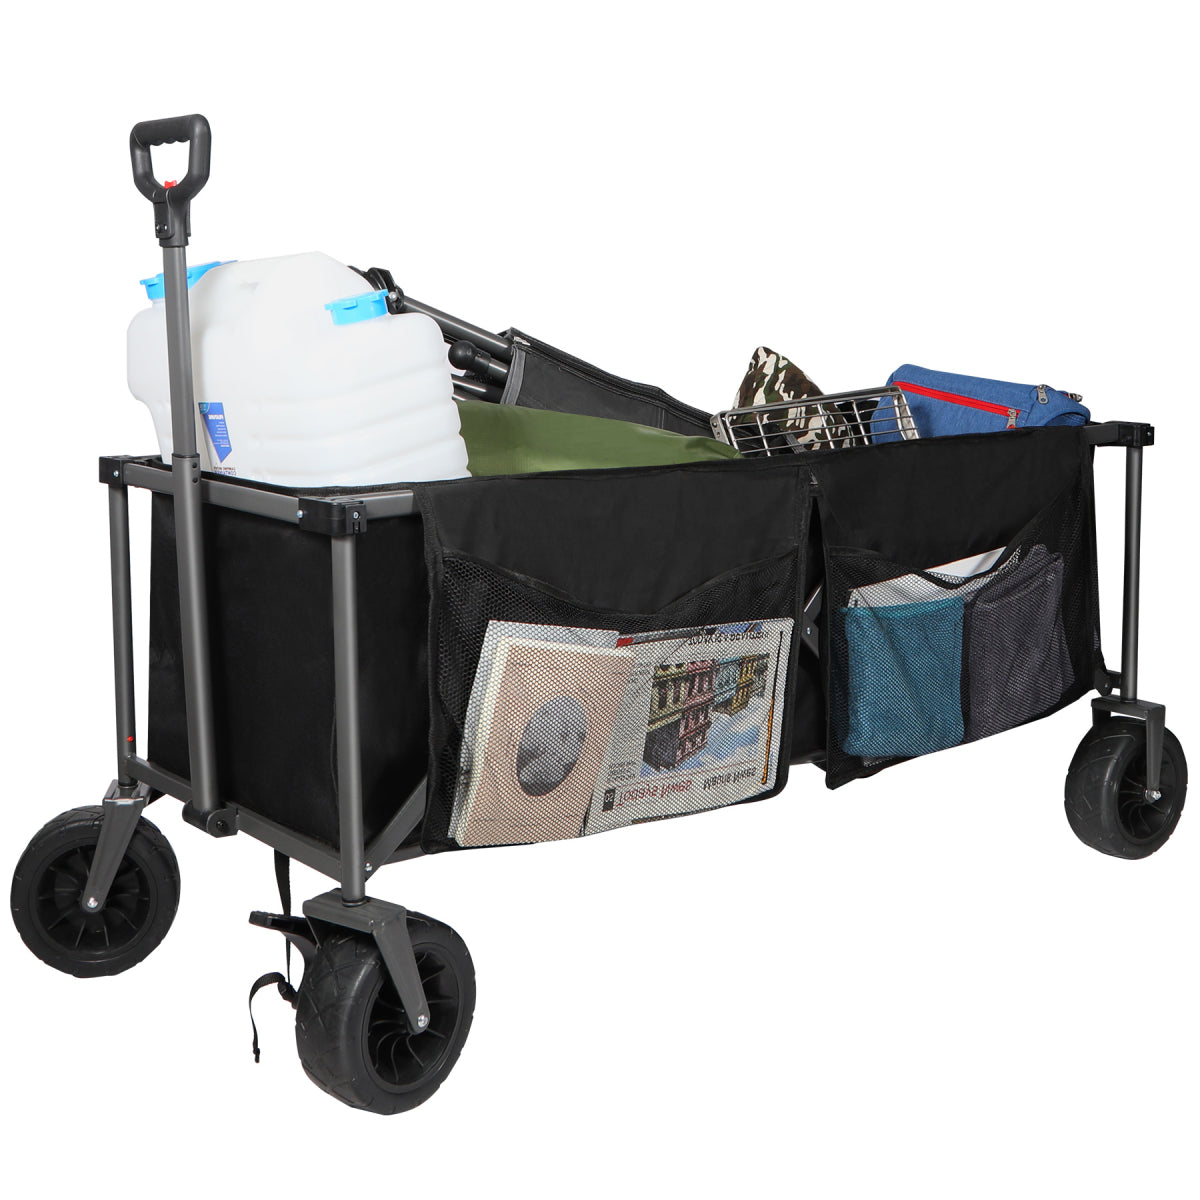 Extra Long Extended Folding Wagon with Side Pocket and Brakes